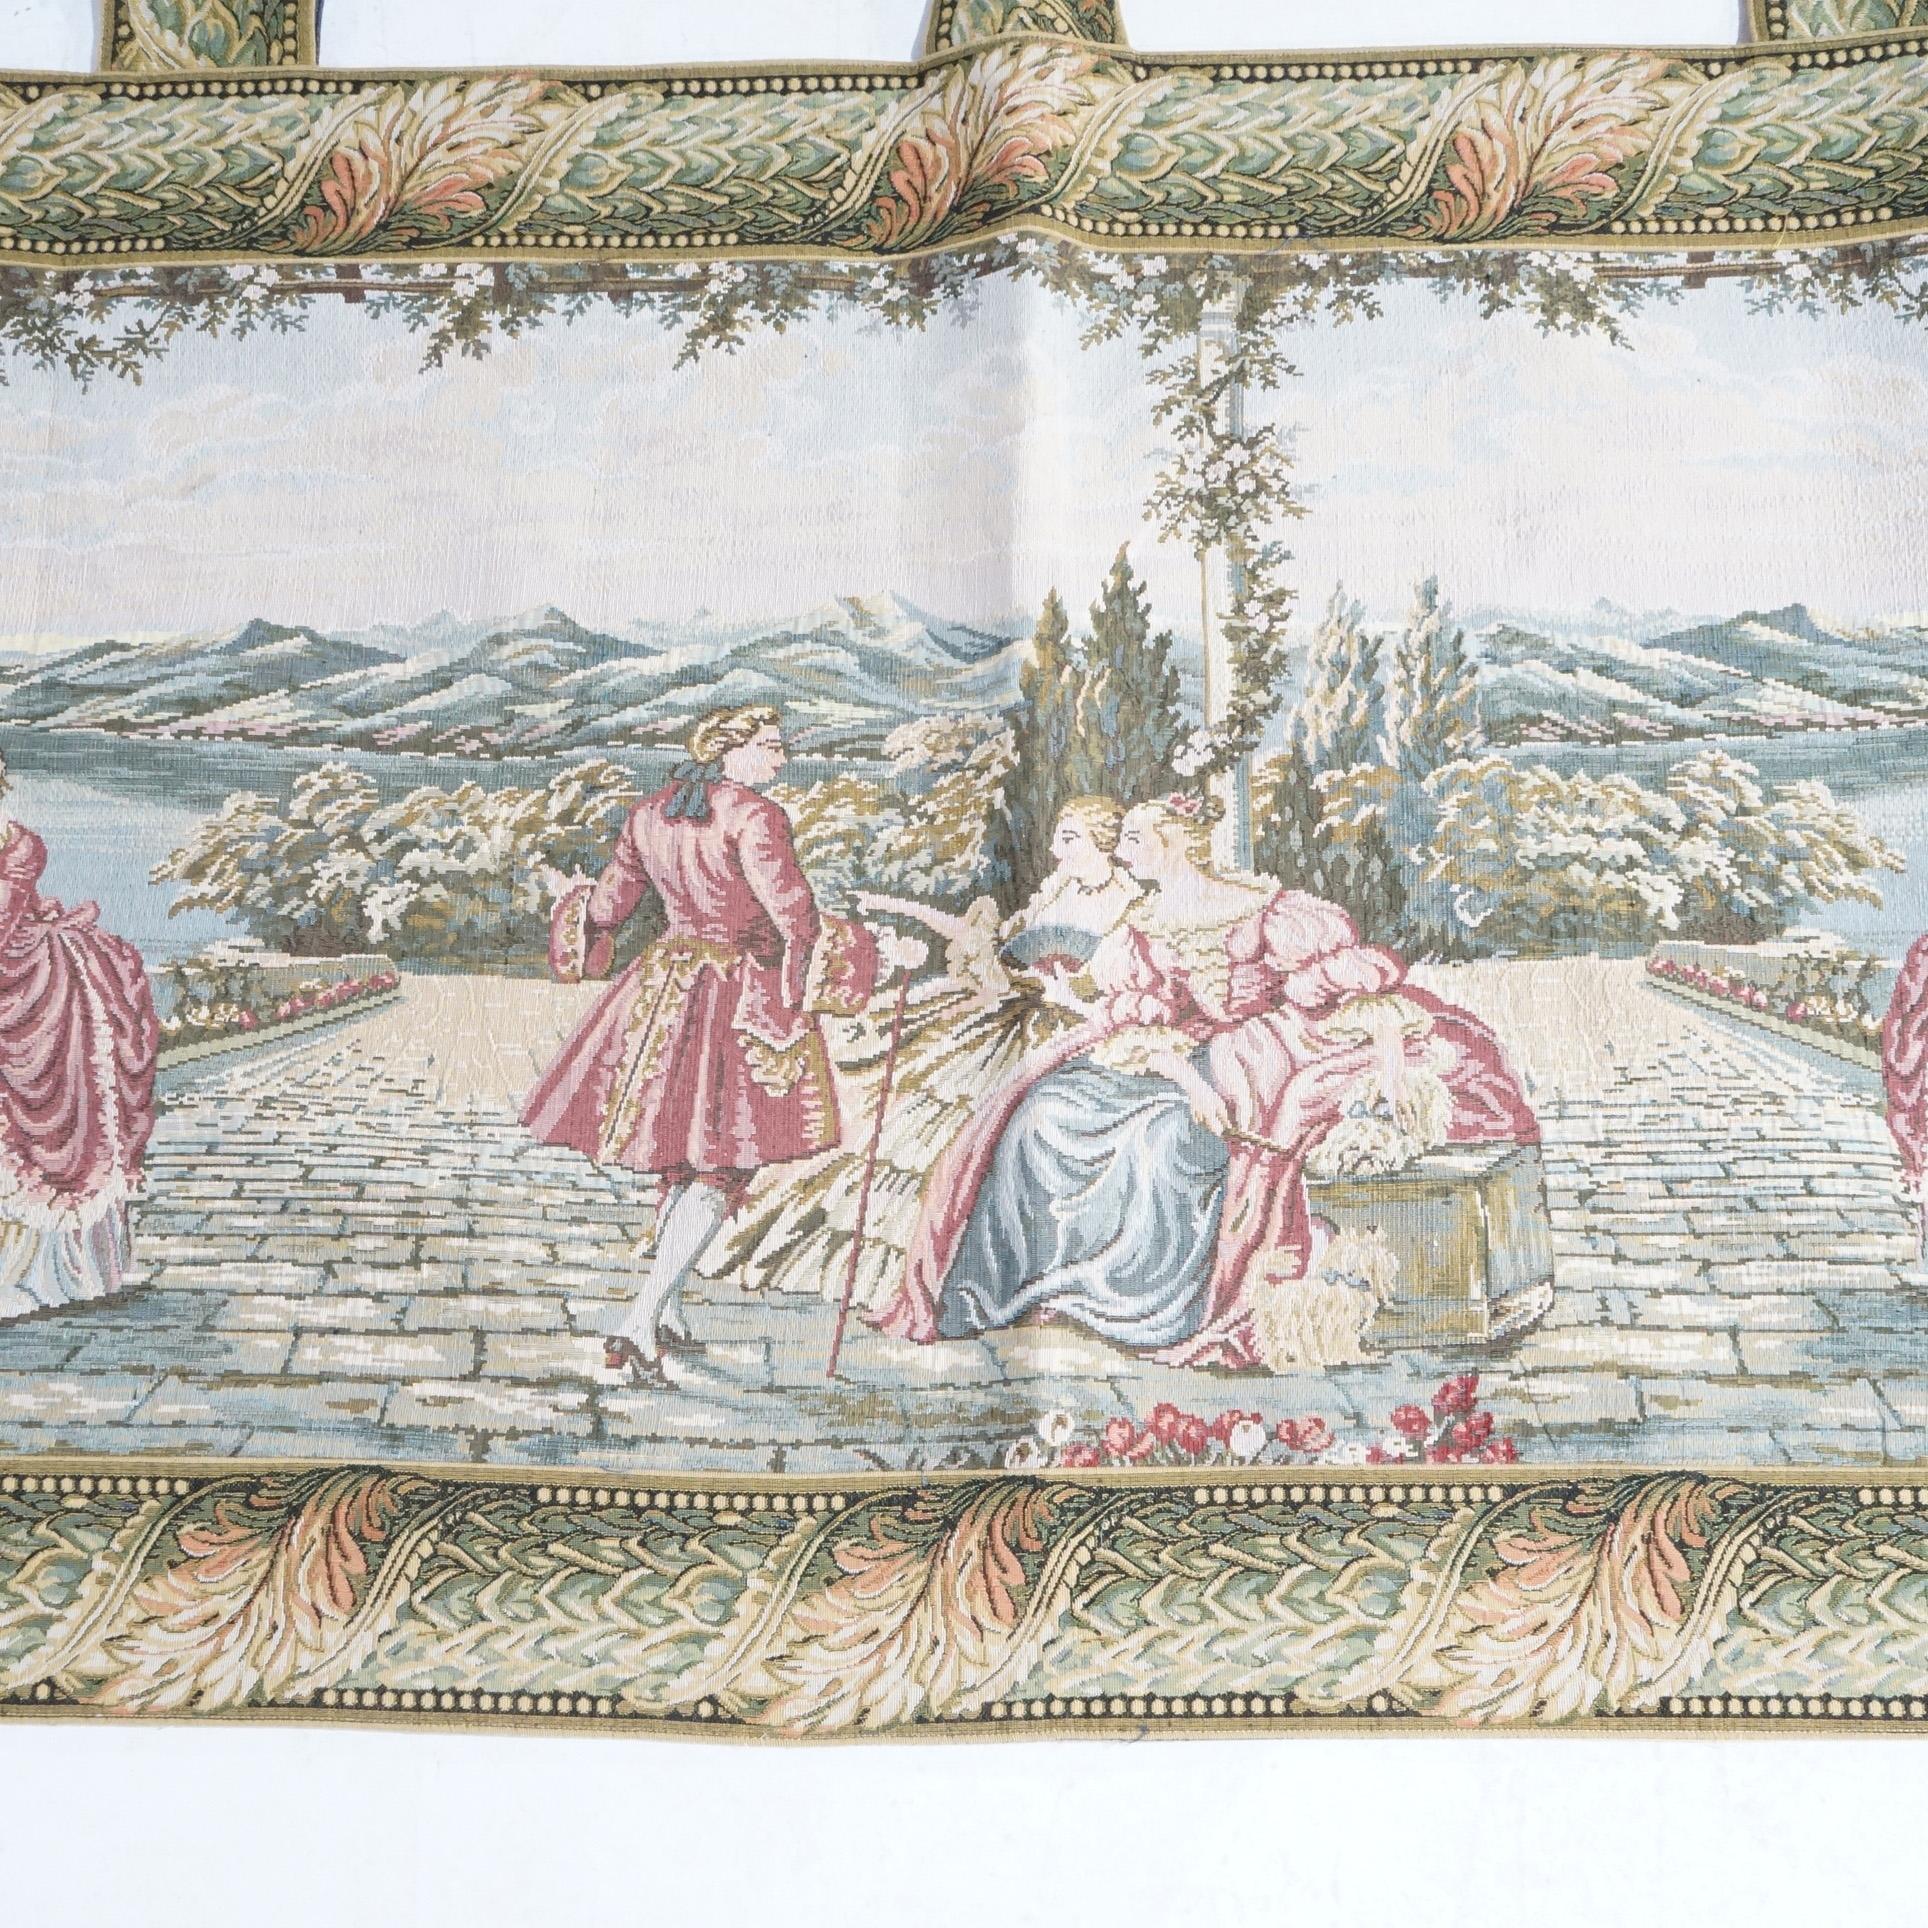 Contemporary Greco-Roman Scenic Courtyard Wall Tapestry with Figures, 20th  In Good Condition For Sale In Big Flats, NY